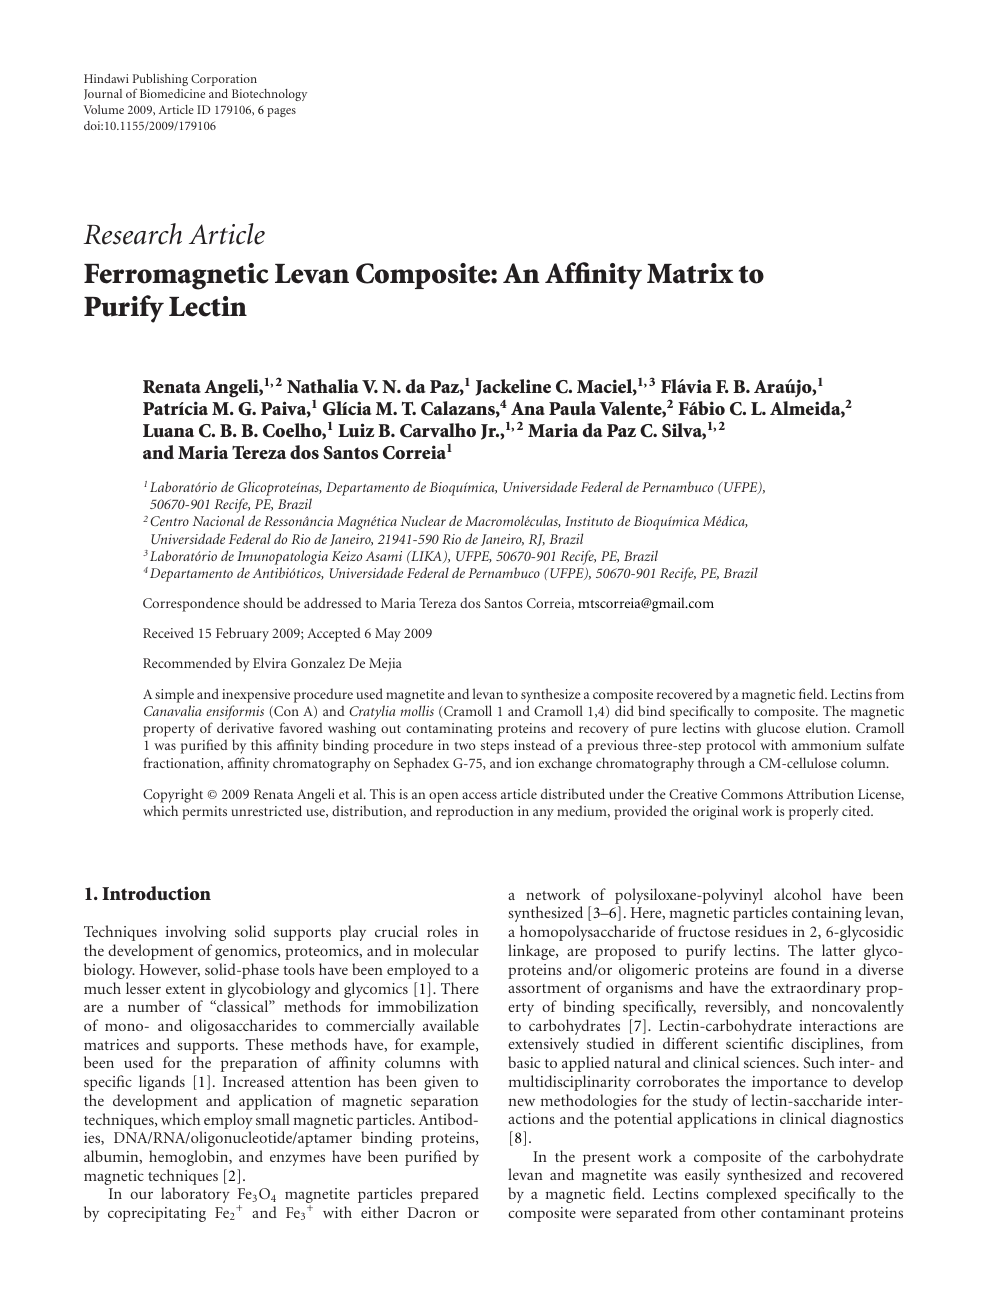 Ferromagnetic Levan Composite An Affinity Matrix To Purify Lectin Topic Of Research Paper In Biological Sciences Download Scholarly Article Pdf And Read For Free On Cyberleninka Open Science Hub